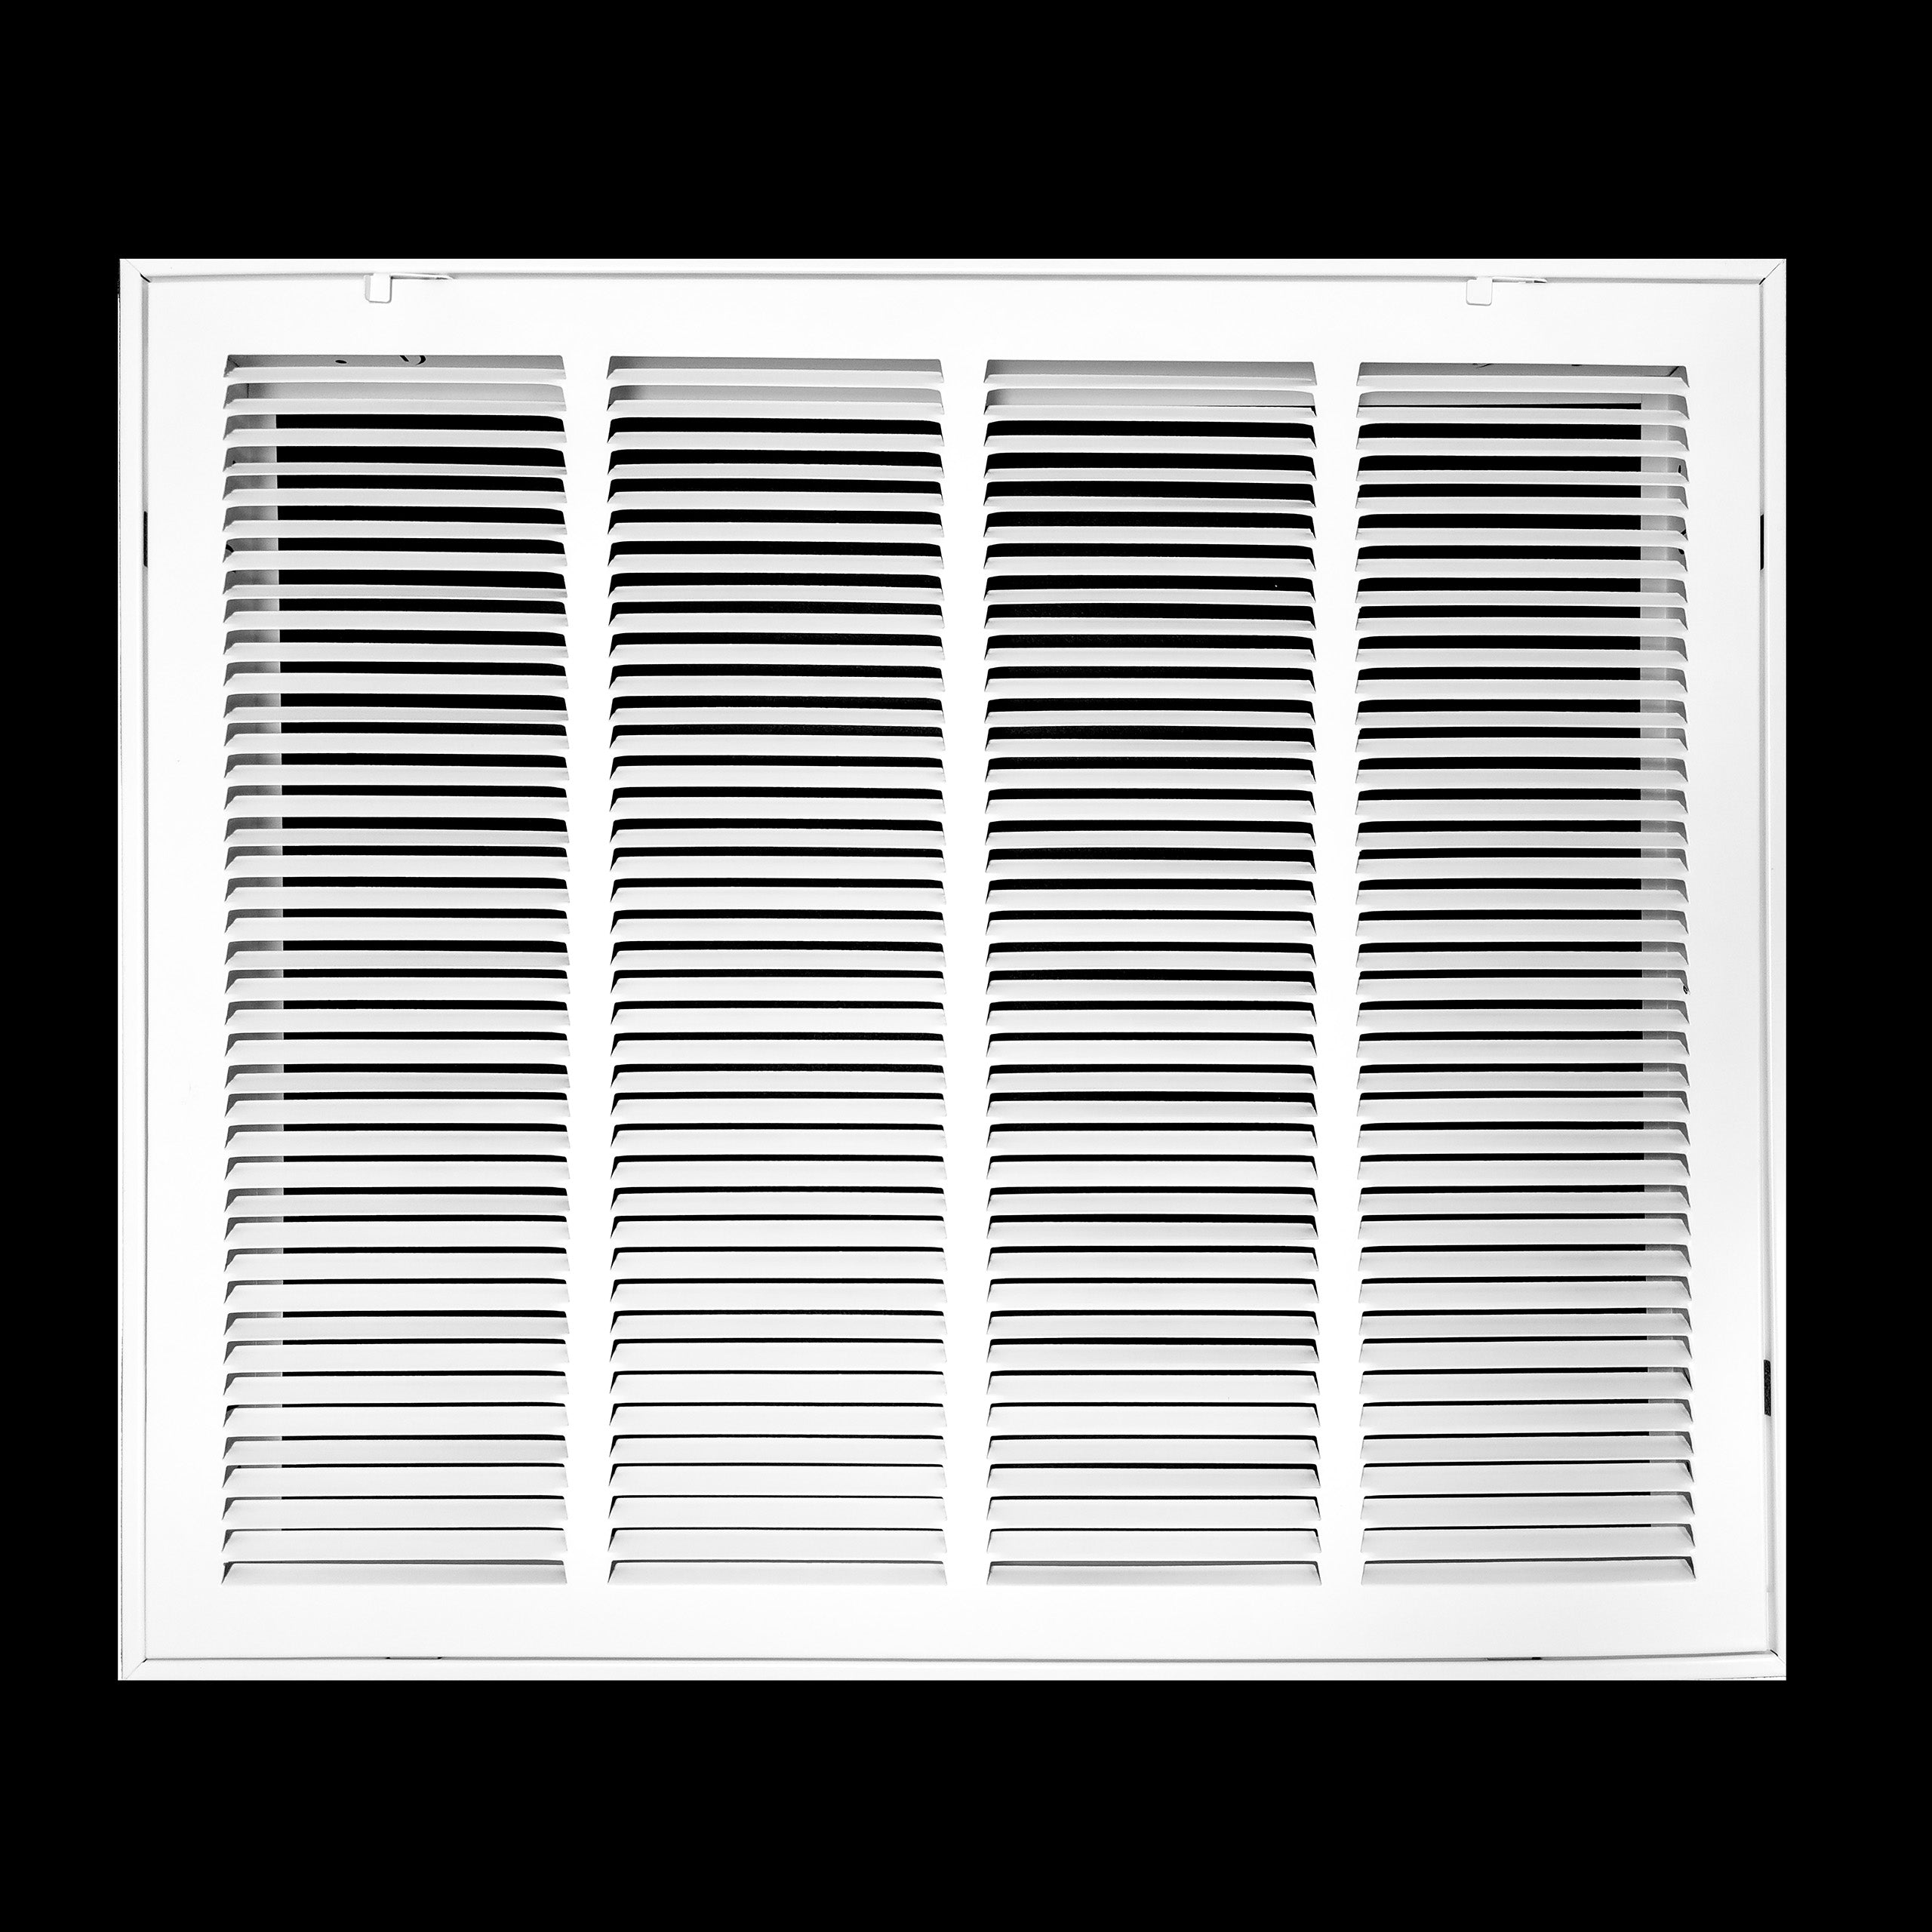 airgrilles 24" x 20" duct opening   hd steel return air filter grille for sidewall and ceiling  agc  7agc-1raf-wh-24x20 756014649499 - 1